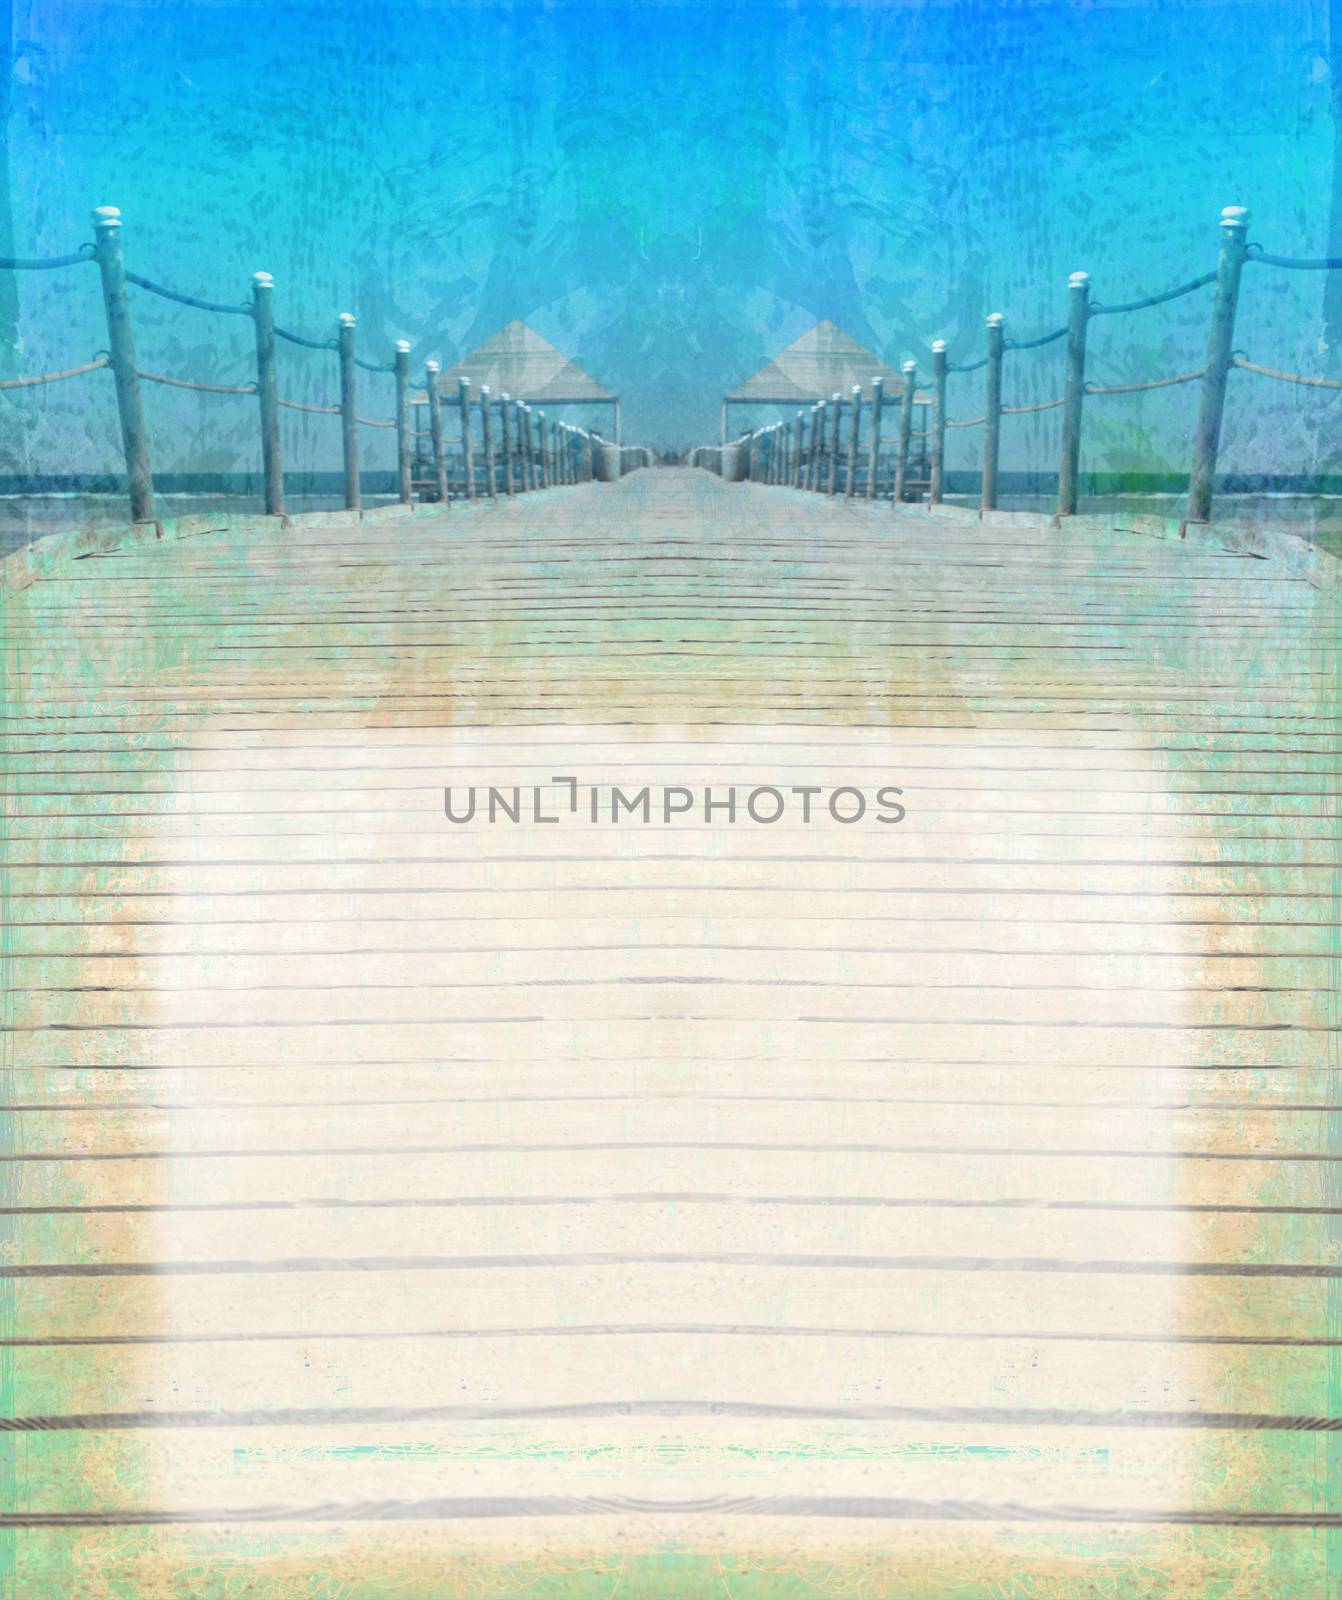 Perspective view of wooden pier - vintage frame